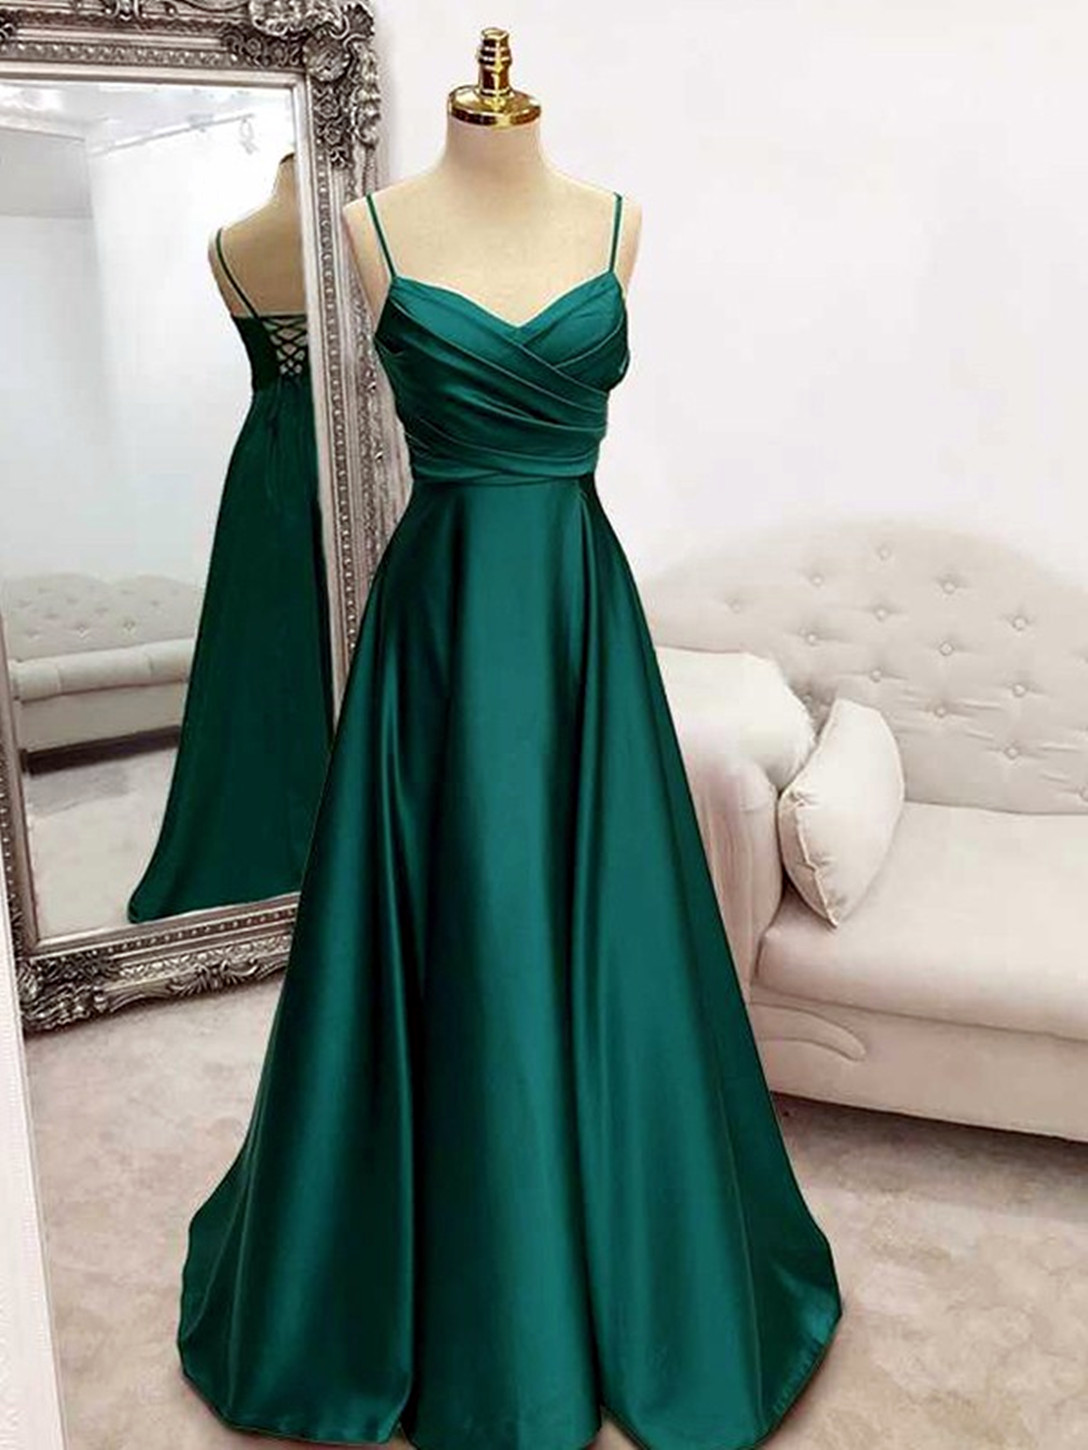 Women A-line/princess Satin Prom Dresses Long Spaghetti Straps Evening Gowns Sleeveless Formal Party Dress Yp013